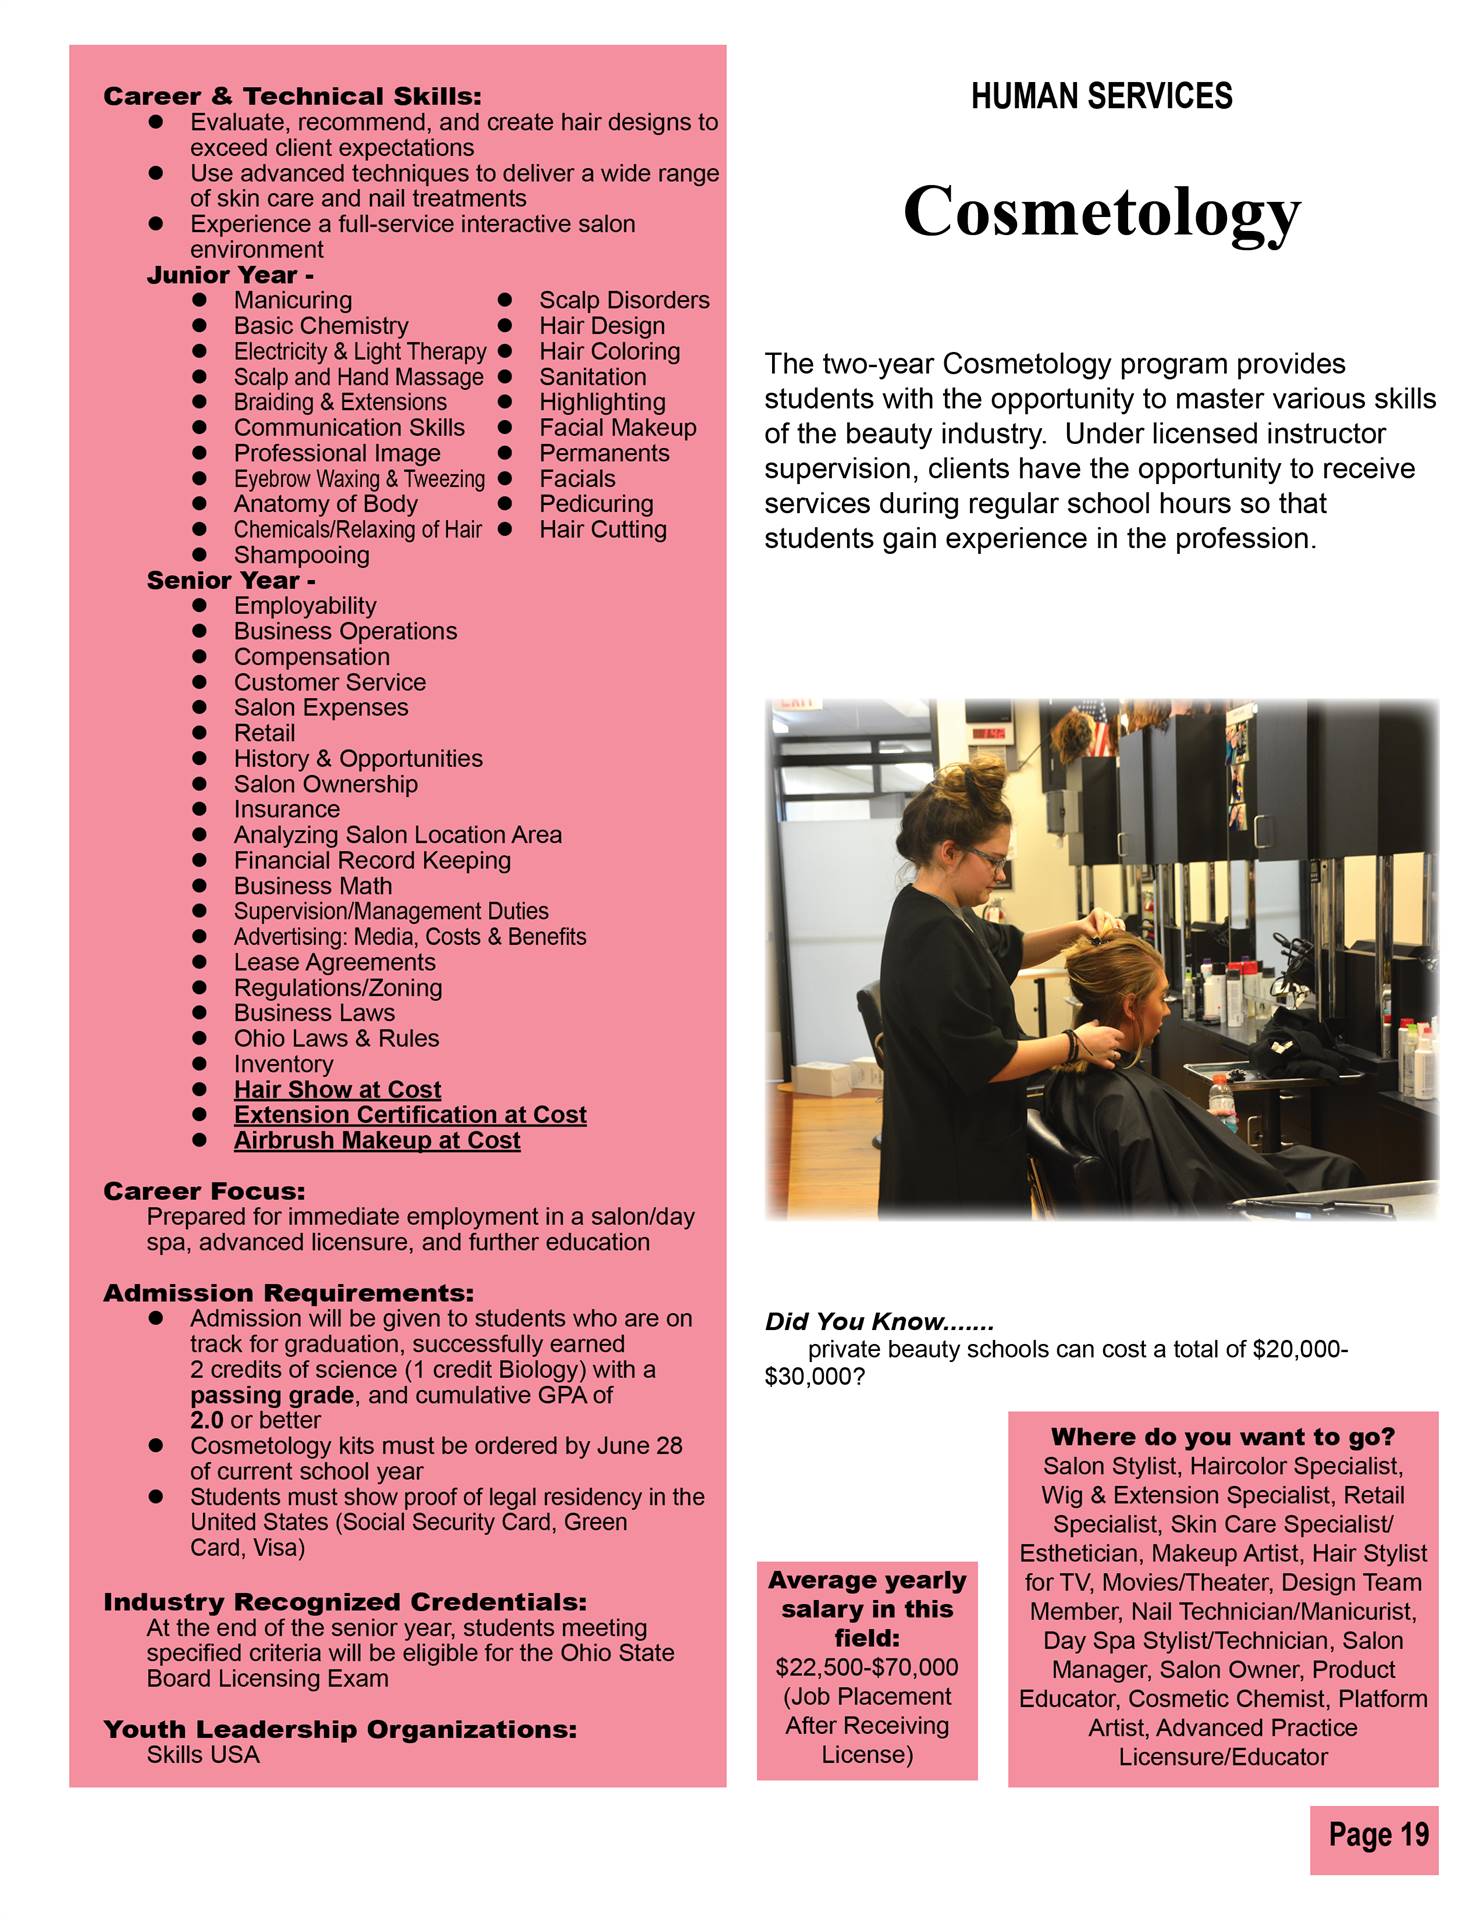 assignments for cosmetology students